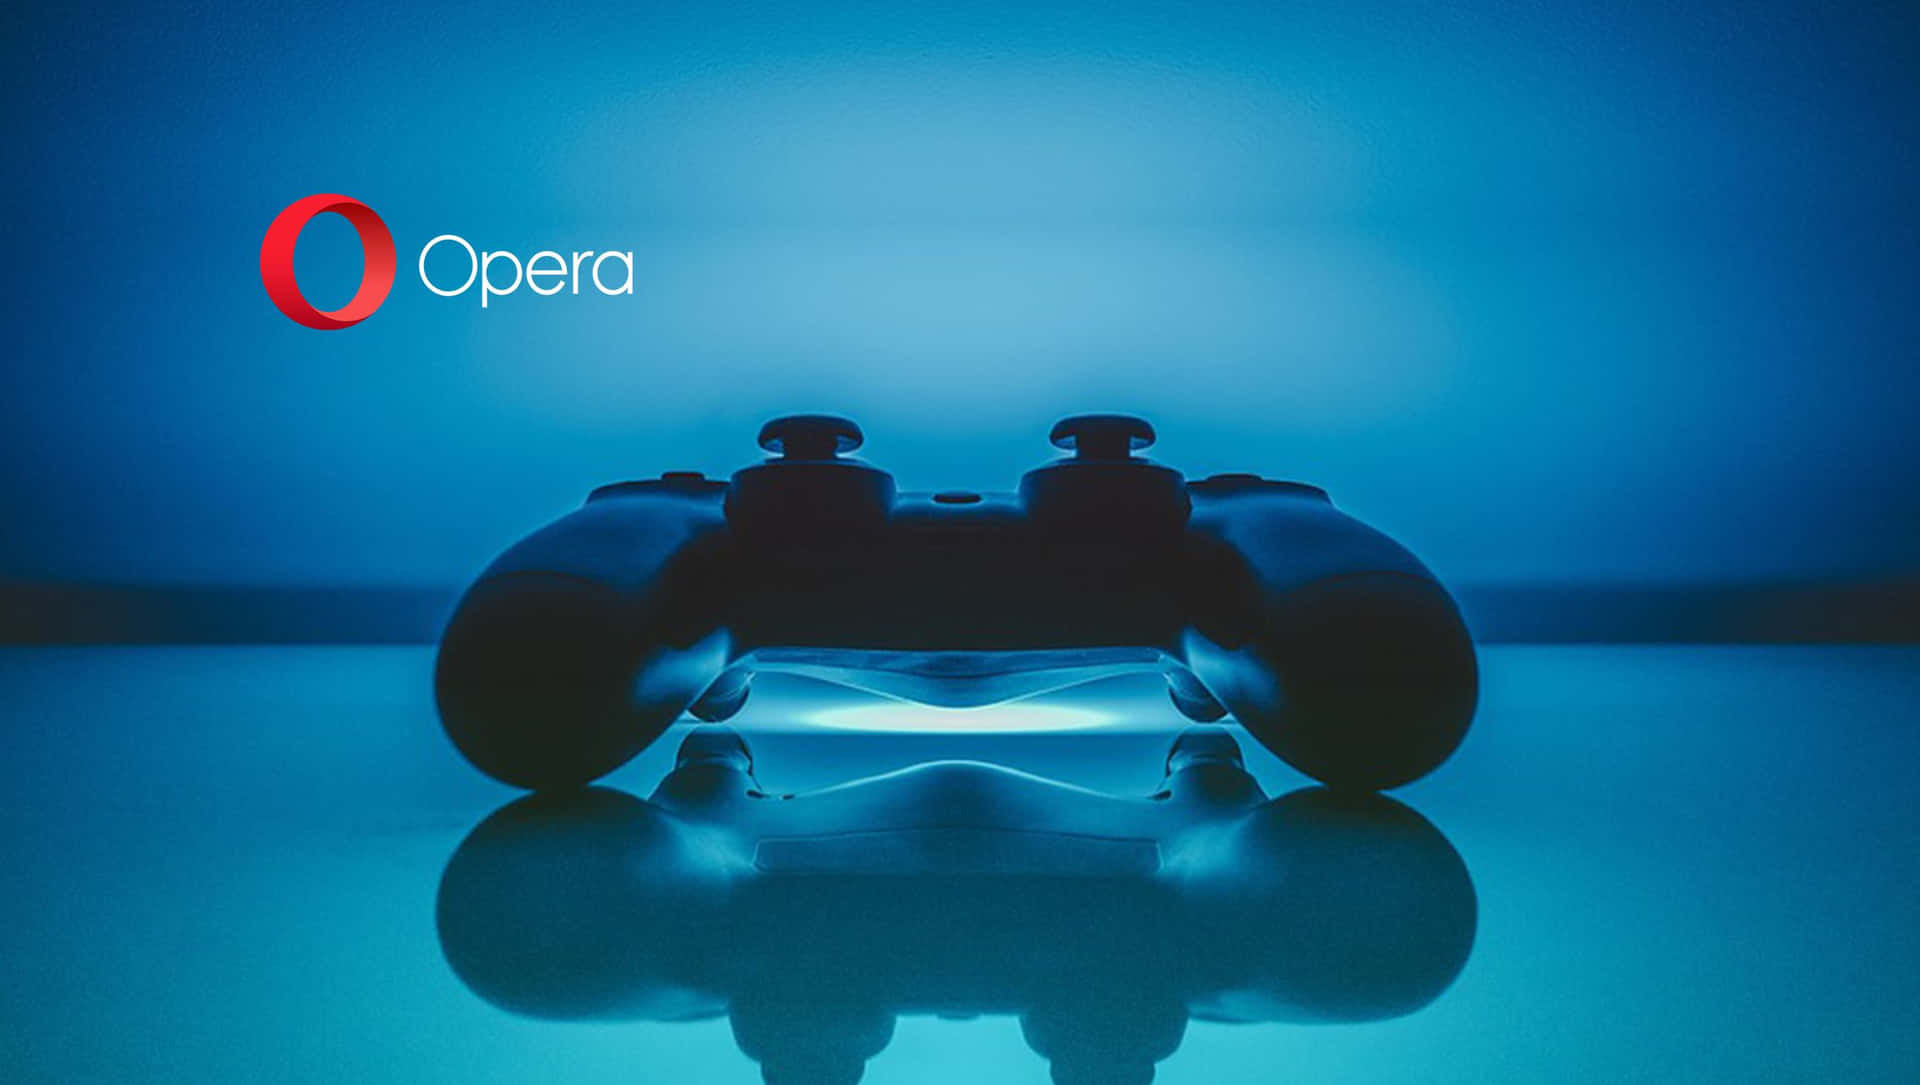 Stay ahead of the game with Opera GX giving you control over your browser Wallpaper